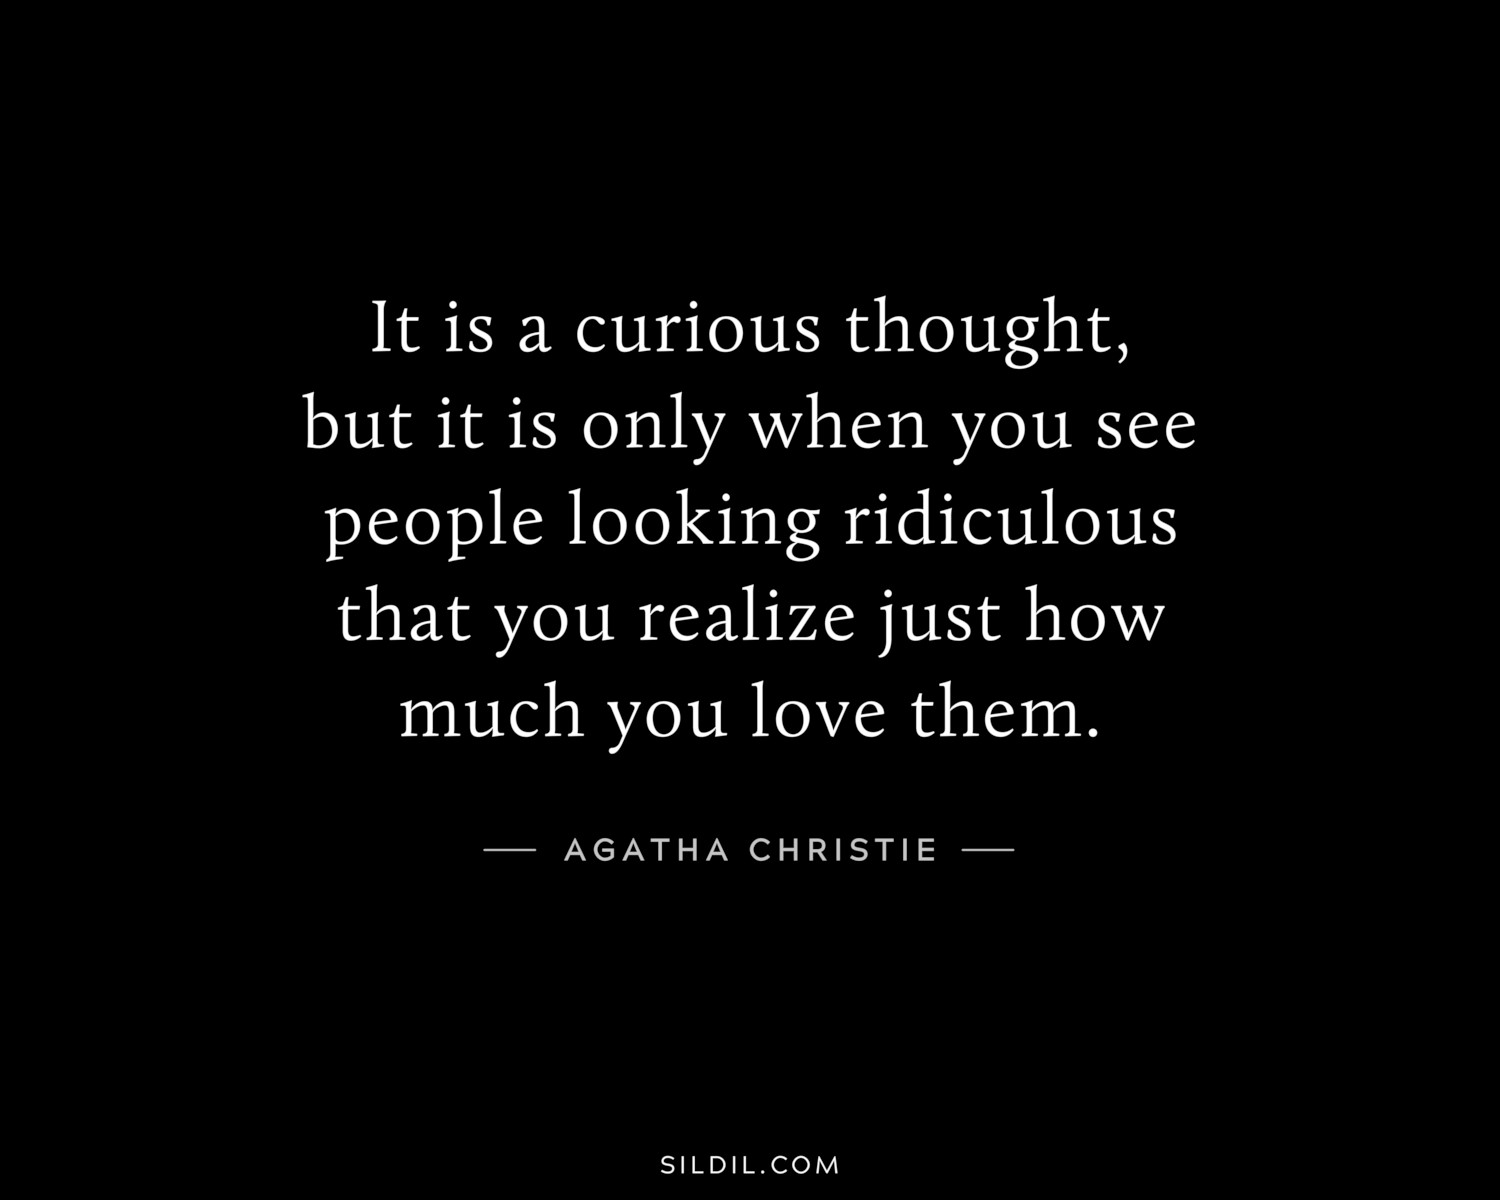 It is a curious thought, but it is only when you see people looking ridiculous that you realize just how much you love them. 